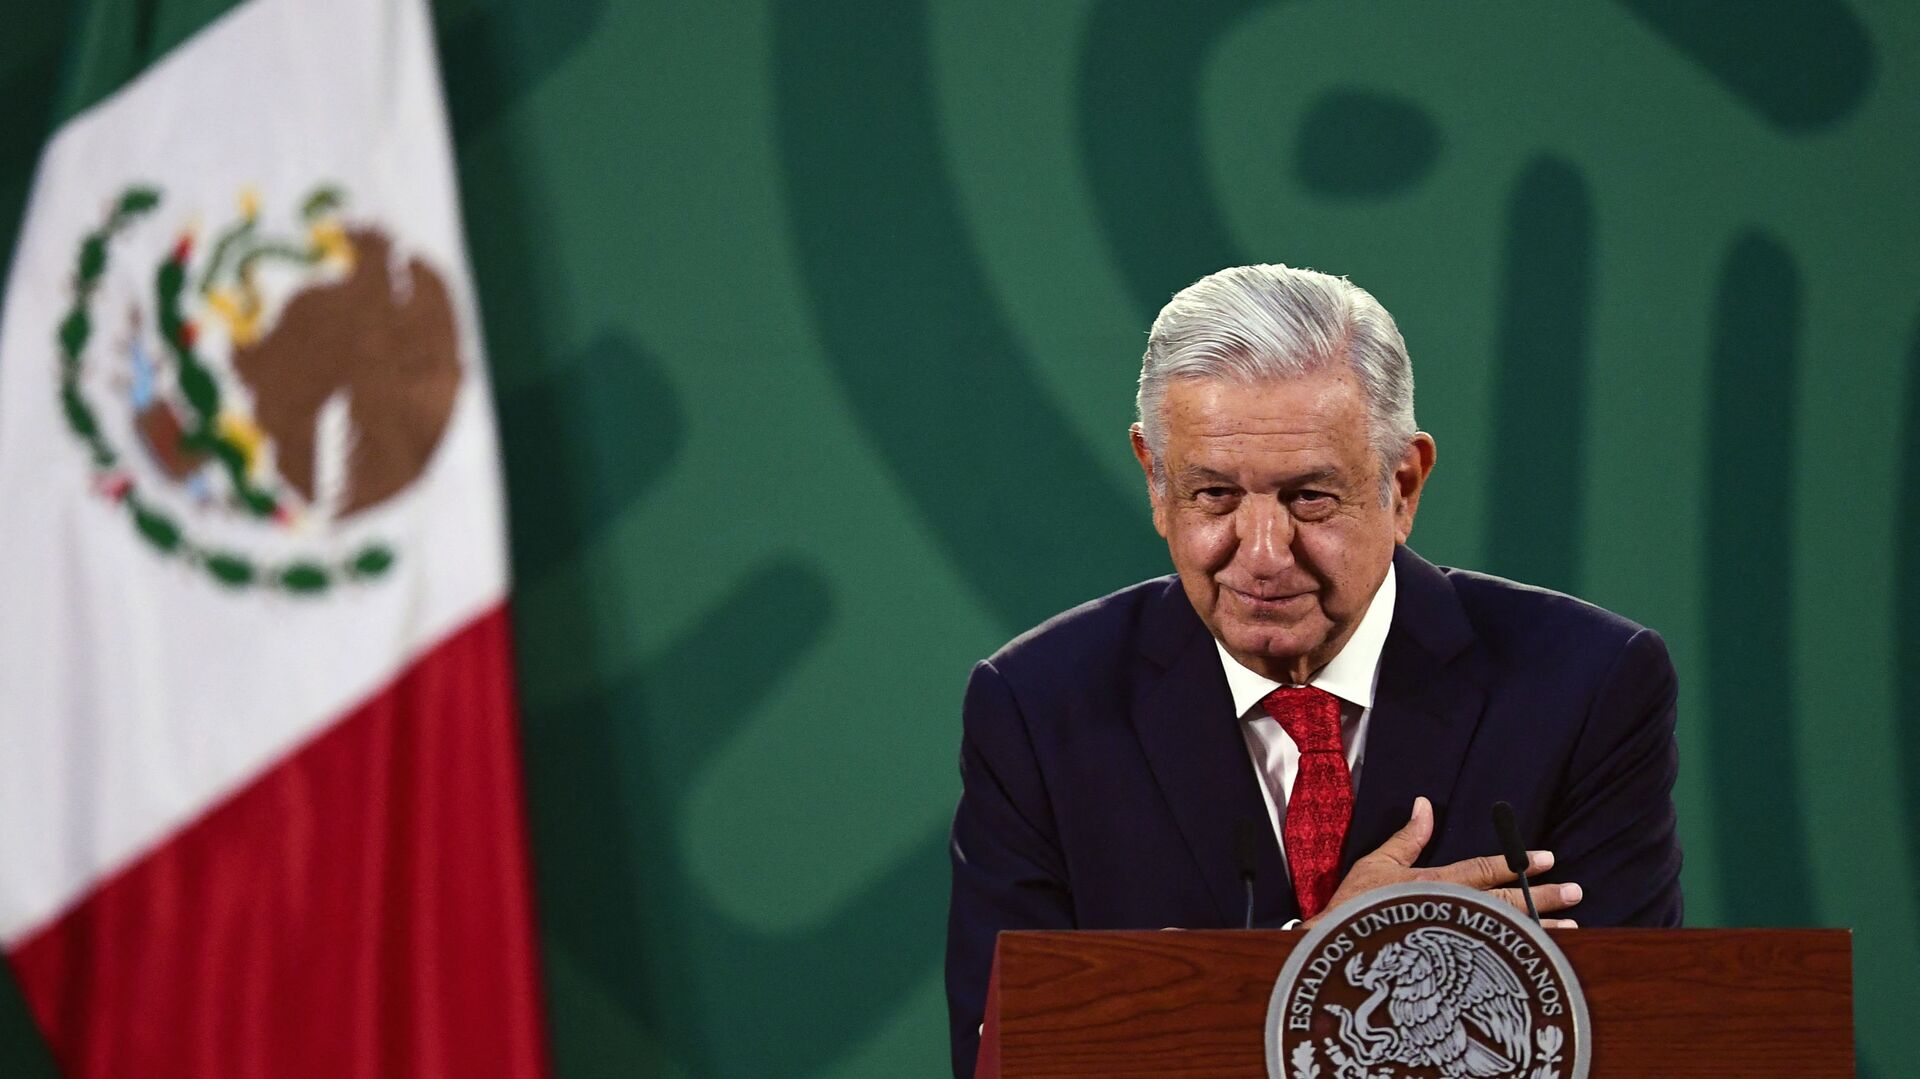 Mexican President Andres Manuel Lopez Obrador delivers a speech during the virtual Earth Day Summit, at the National Palace in Mexico City, on April 22, 2021 - Sputnik International, 1920, 12.07.2021